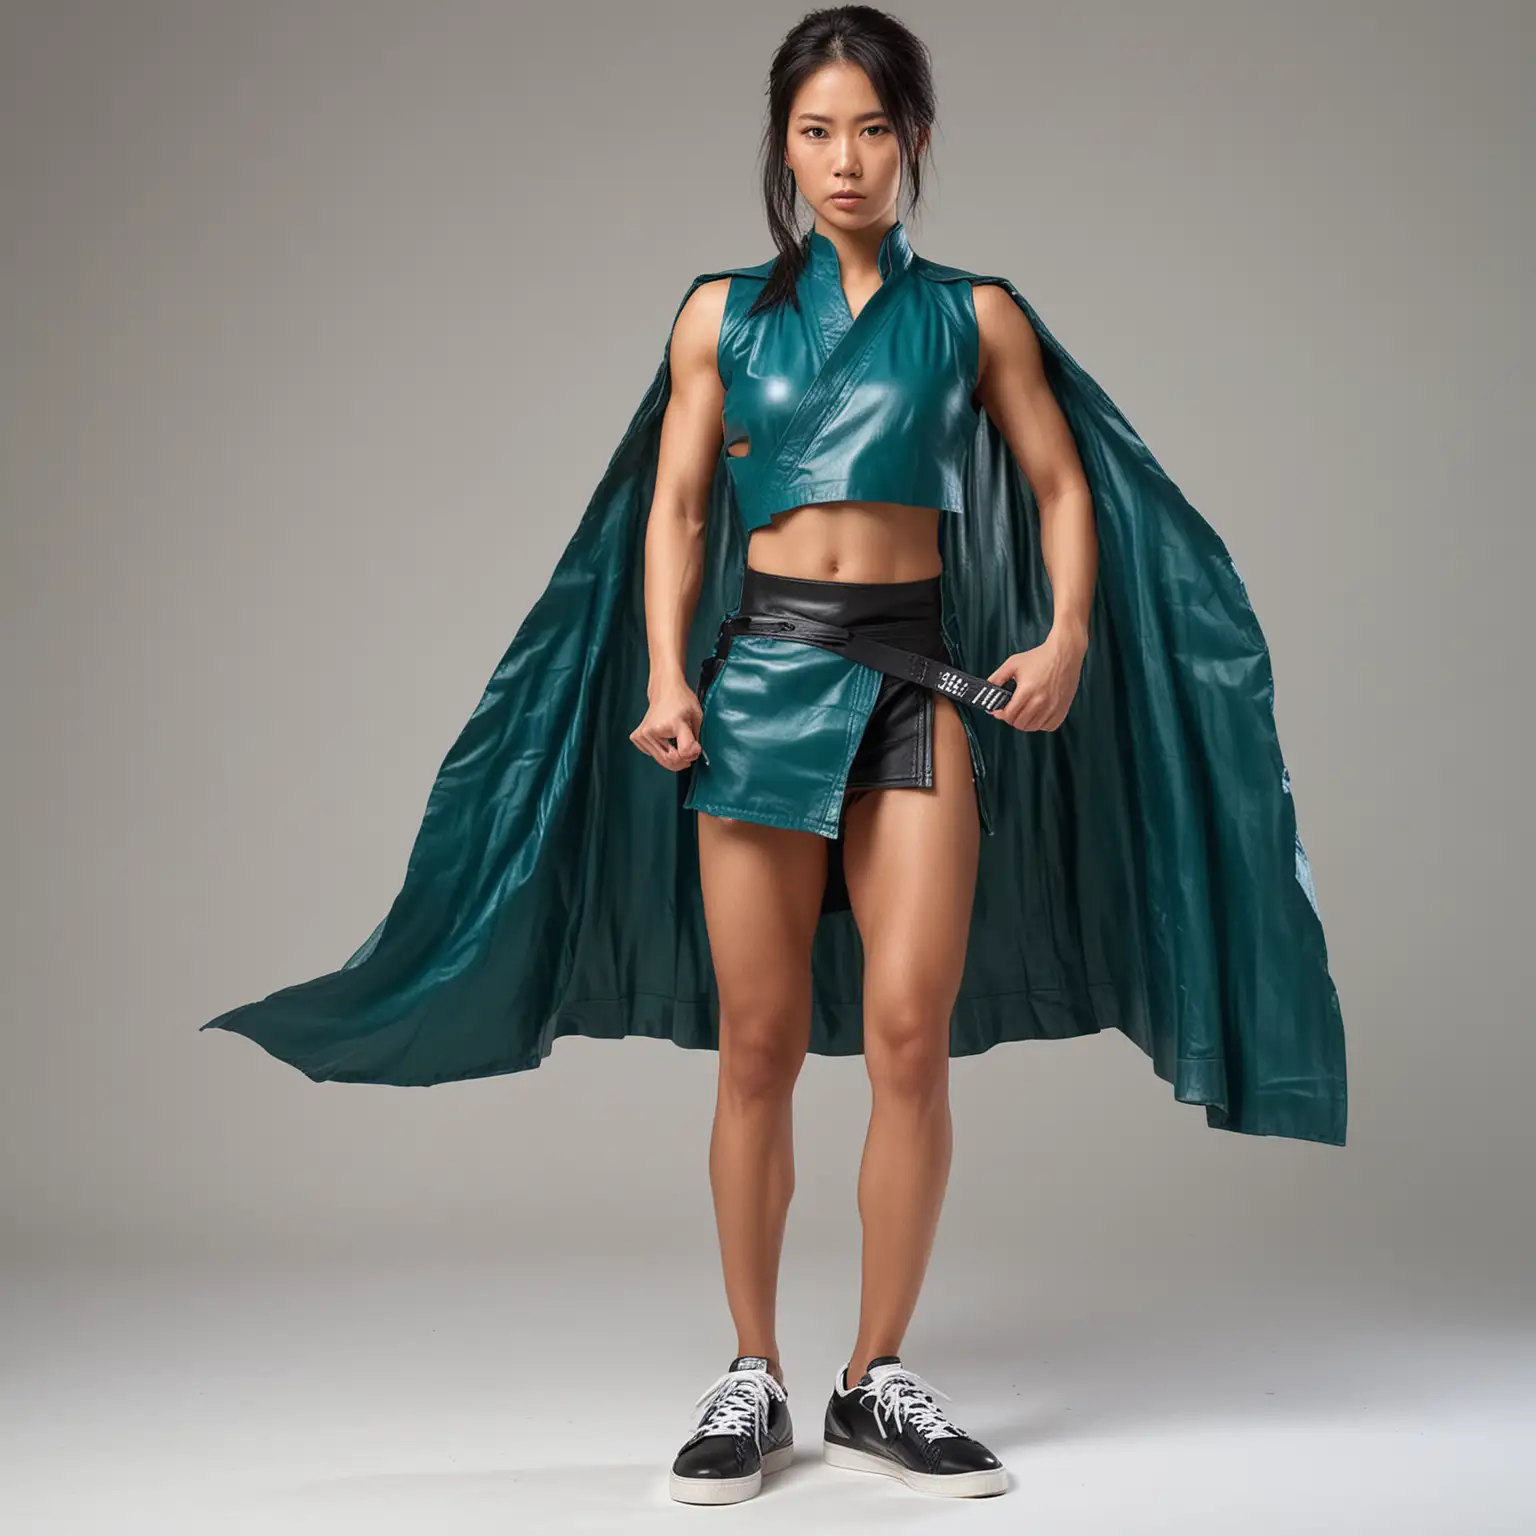 Standing full body view, strong muscular beautiful Japanese woman in sleeveless, leather teal double thigh slit dress karate gi, exposed midriff, bare shoulders, teal cape, black sneakers, white background